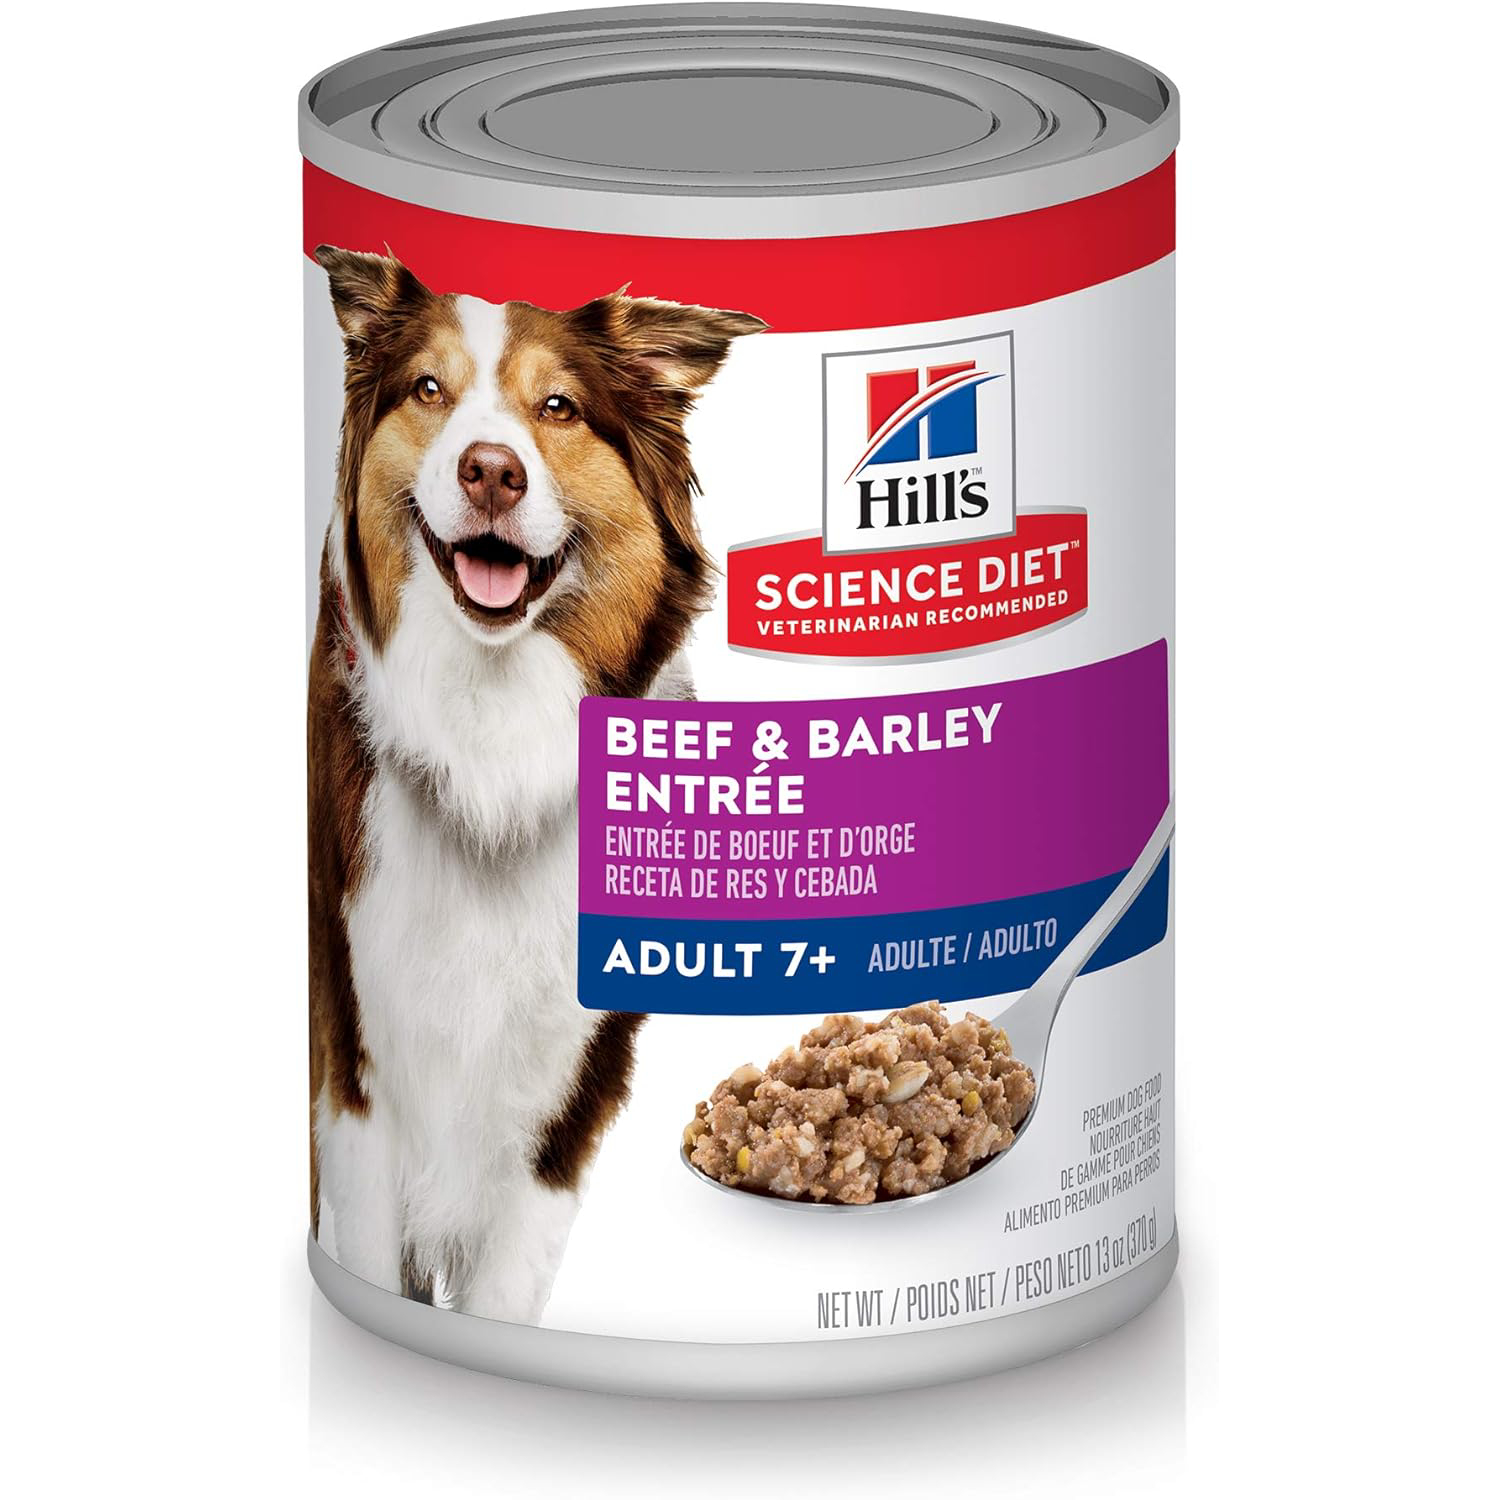 Hill’s Science Diet Senior Canned Dog Food